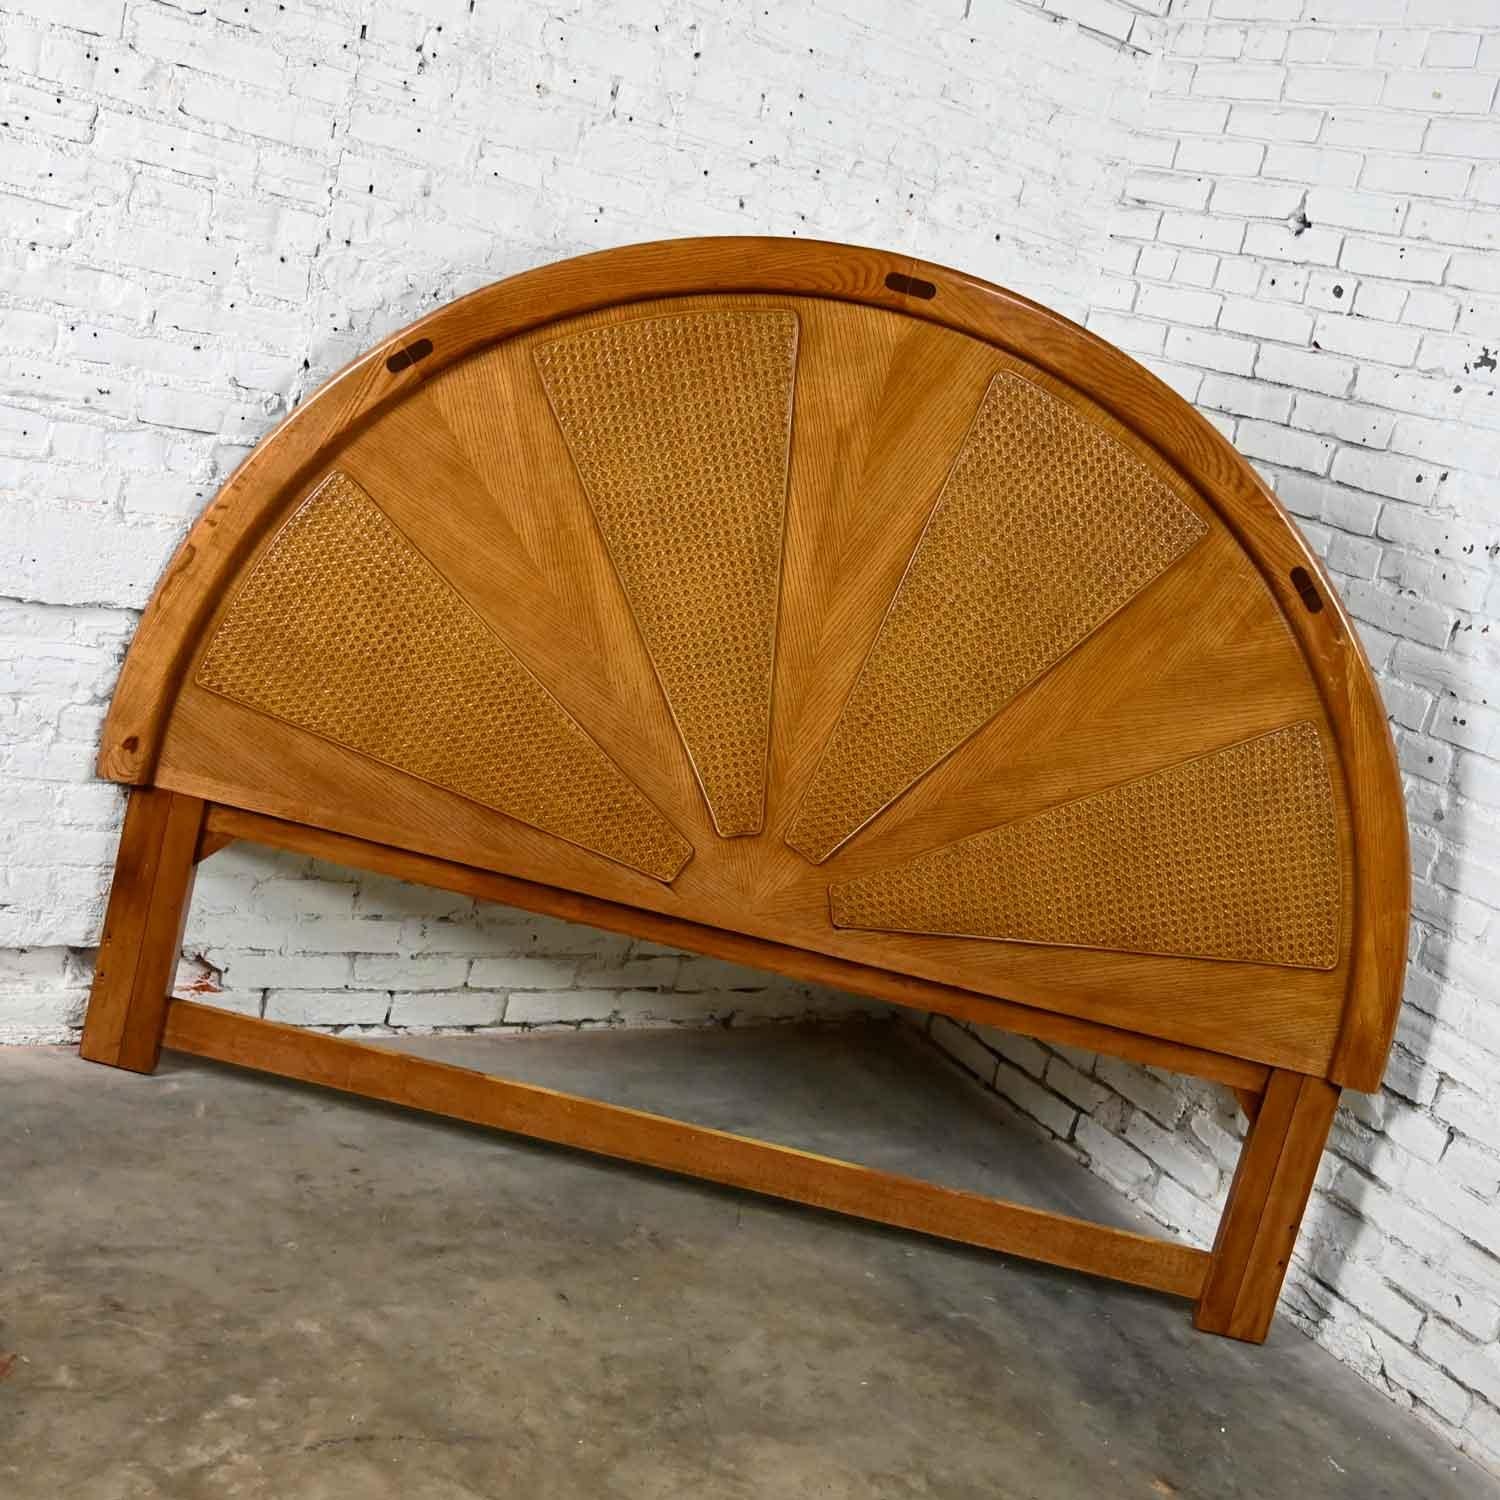 Wonderful vintage modern to postmodern arched rising sun pattered oak and cane king sized headboard. Beautiful condition, keeping in mind that this is vintage and not new so will have signs of use and wear. Several scratches on the arched outer